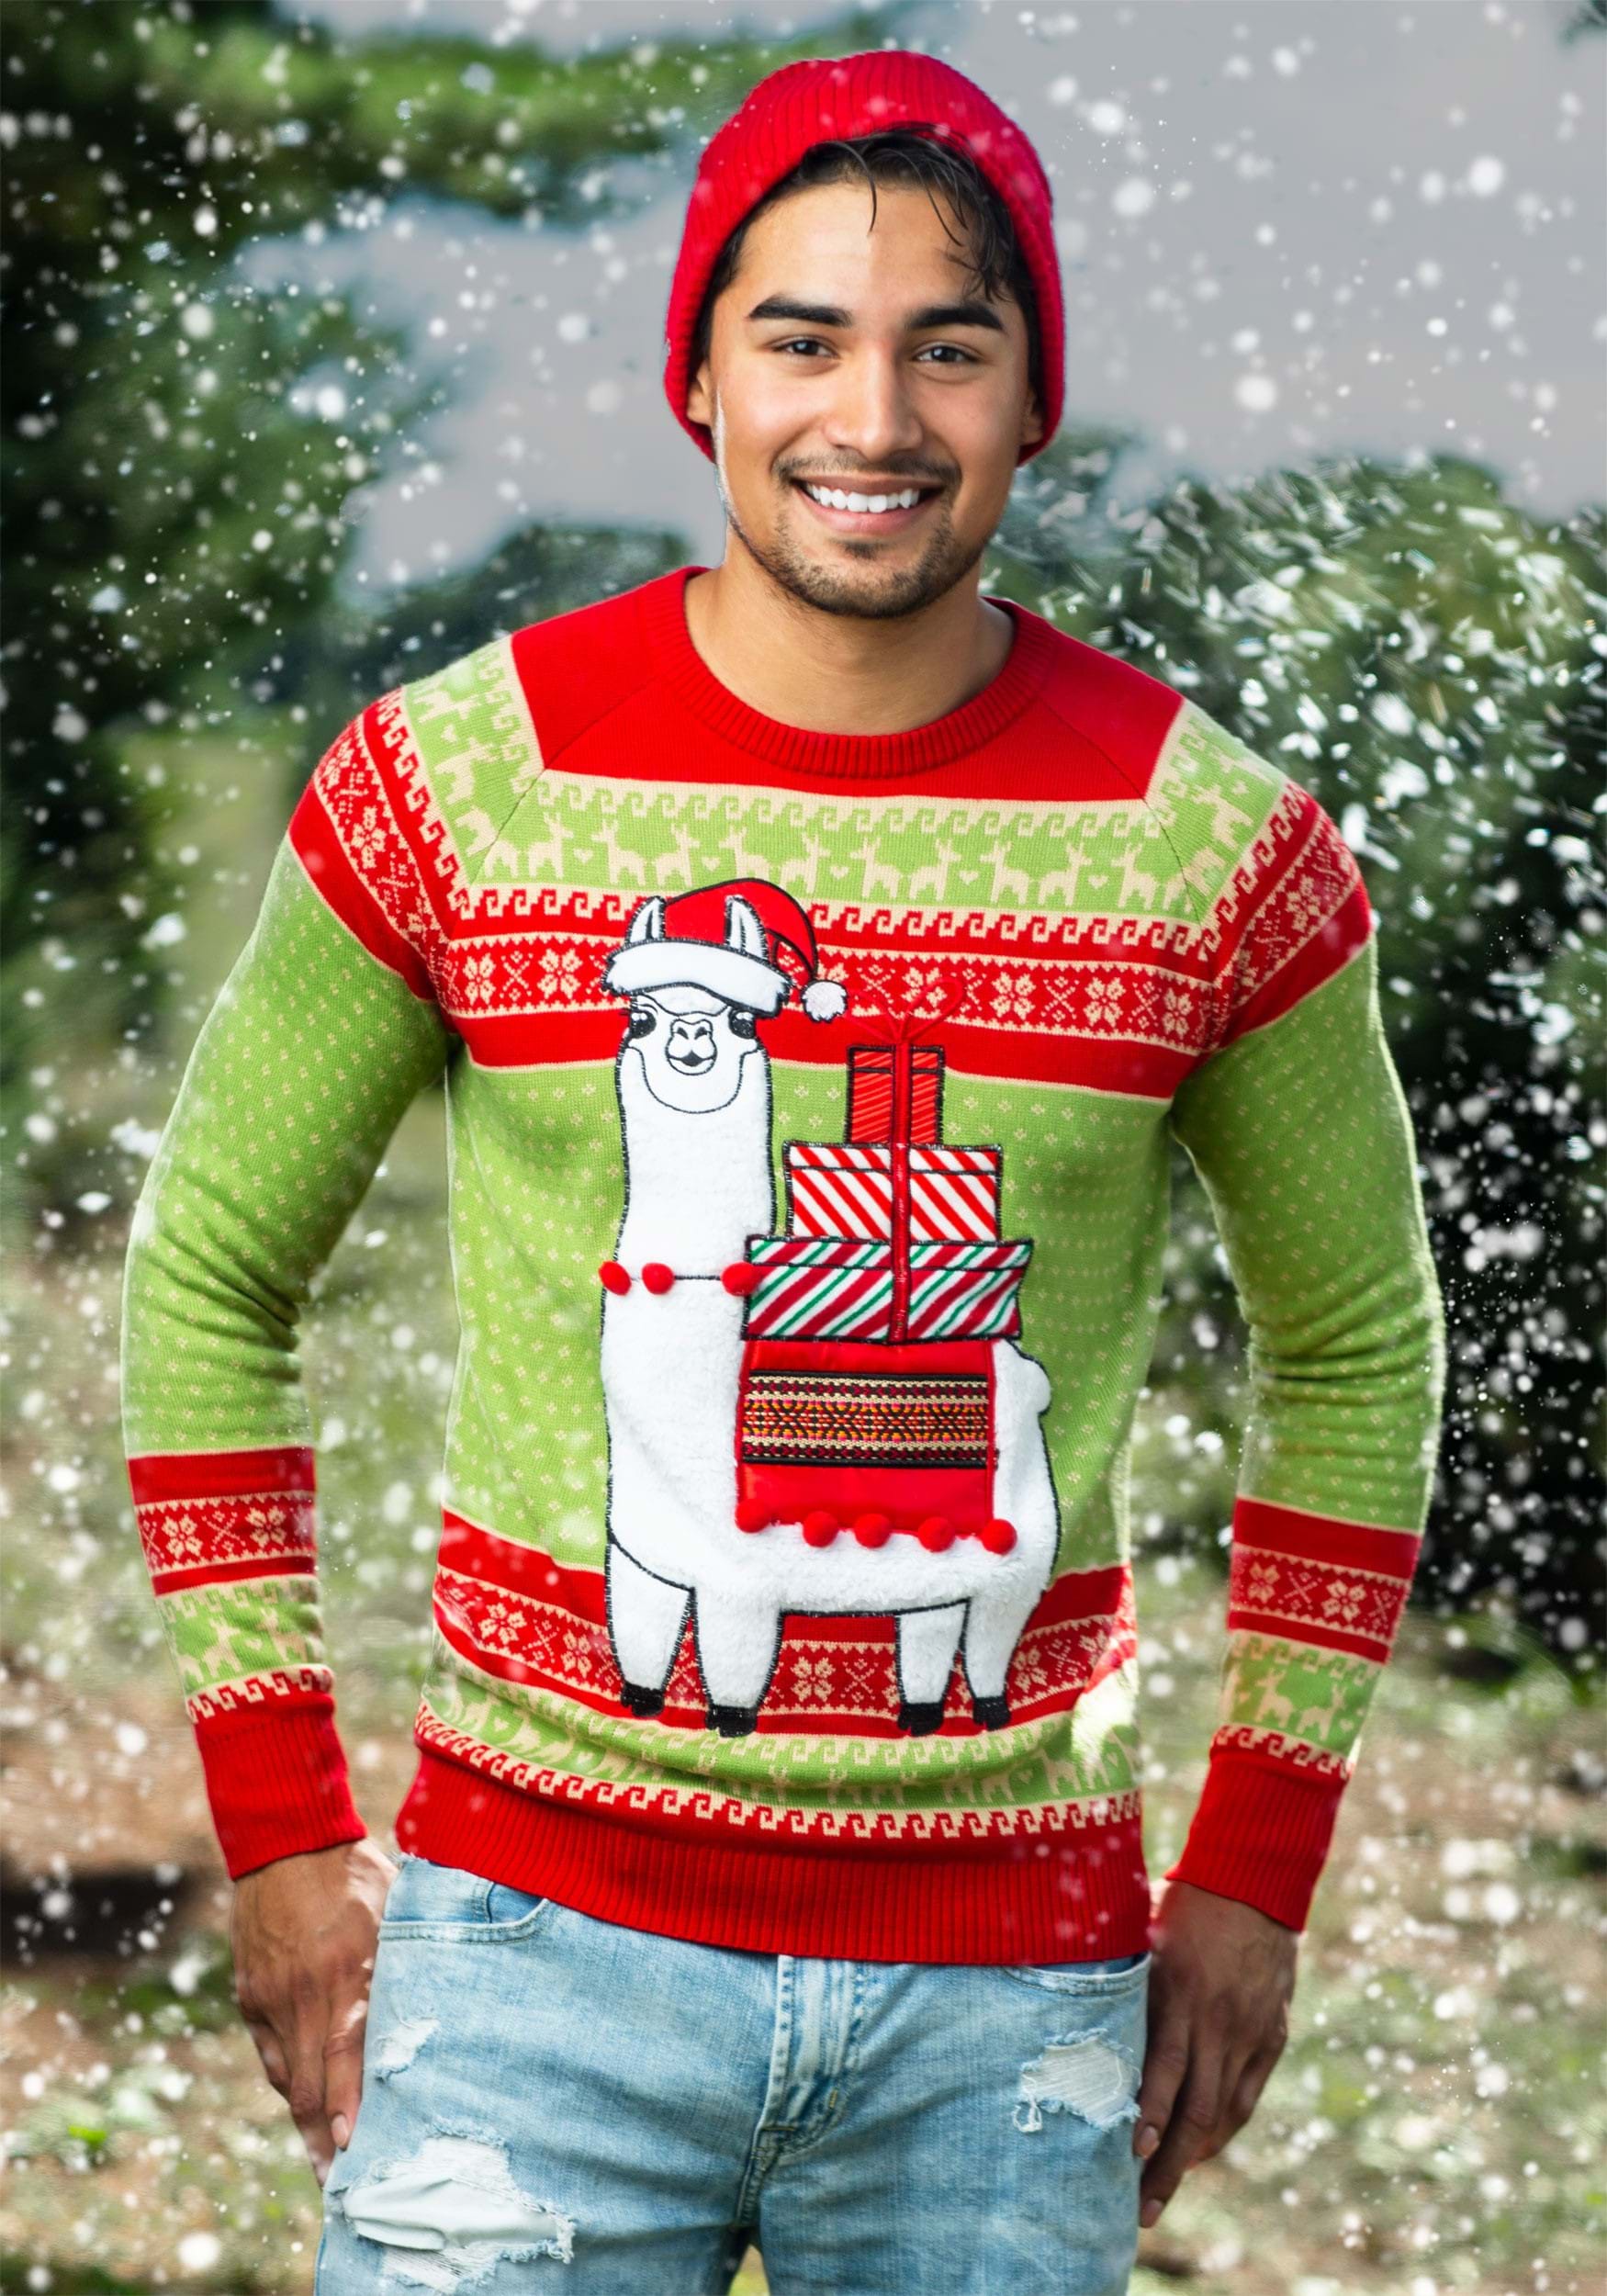 https://images.fun.com/products/58841/2-1-259247/adult-christmas-llama-ugly-sweater-alt-2.jpg